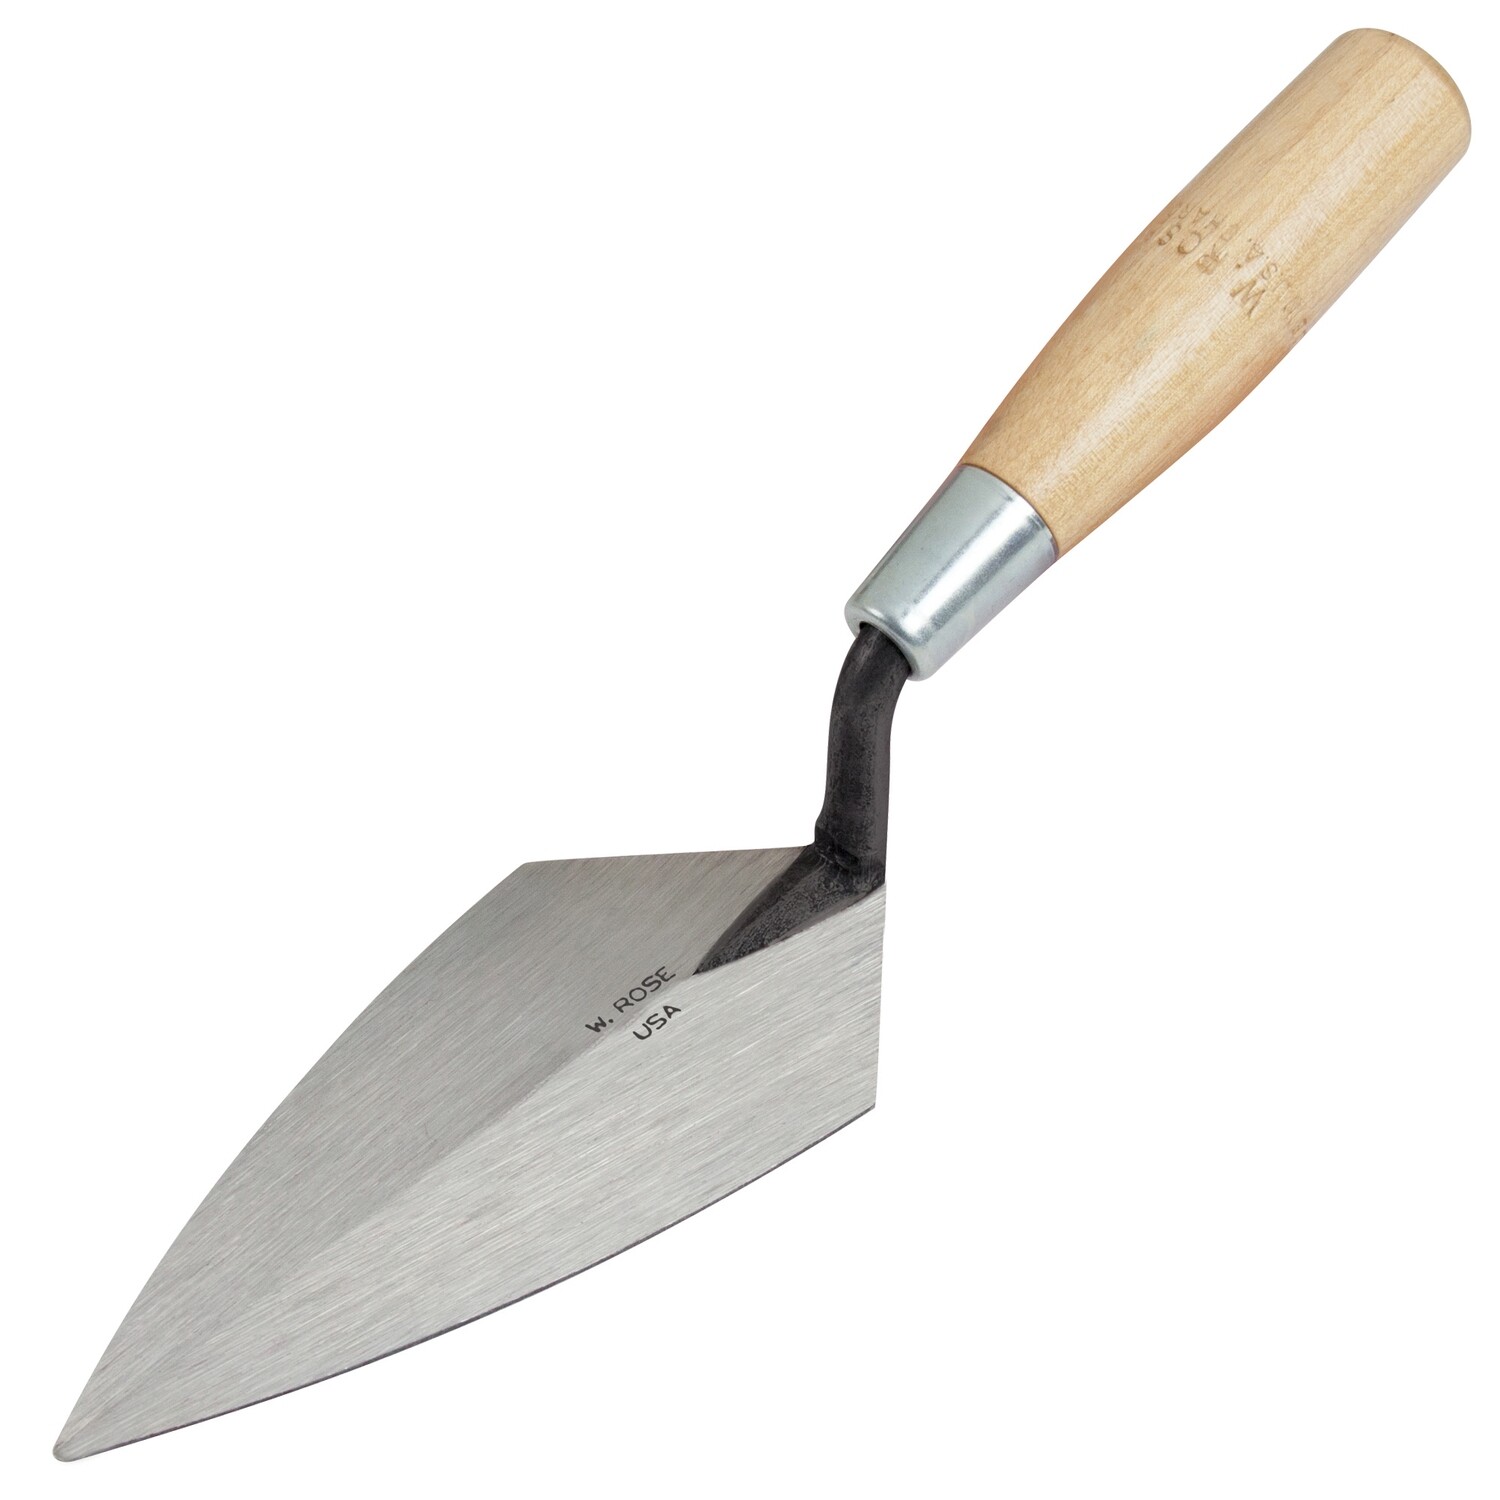 Kraft RO50-7 W.Rose 7" x 3-3/8" Pointing Trowel with Wood Handle